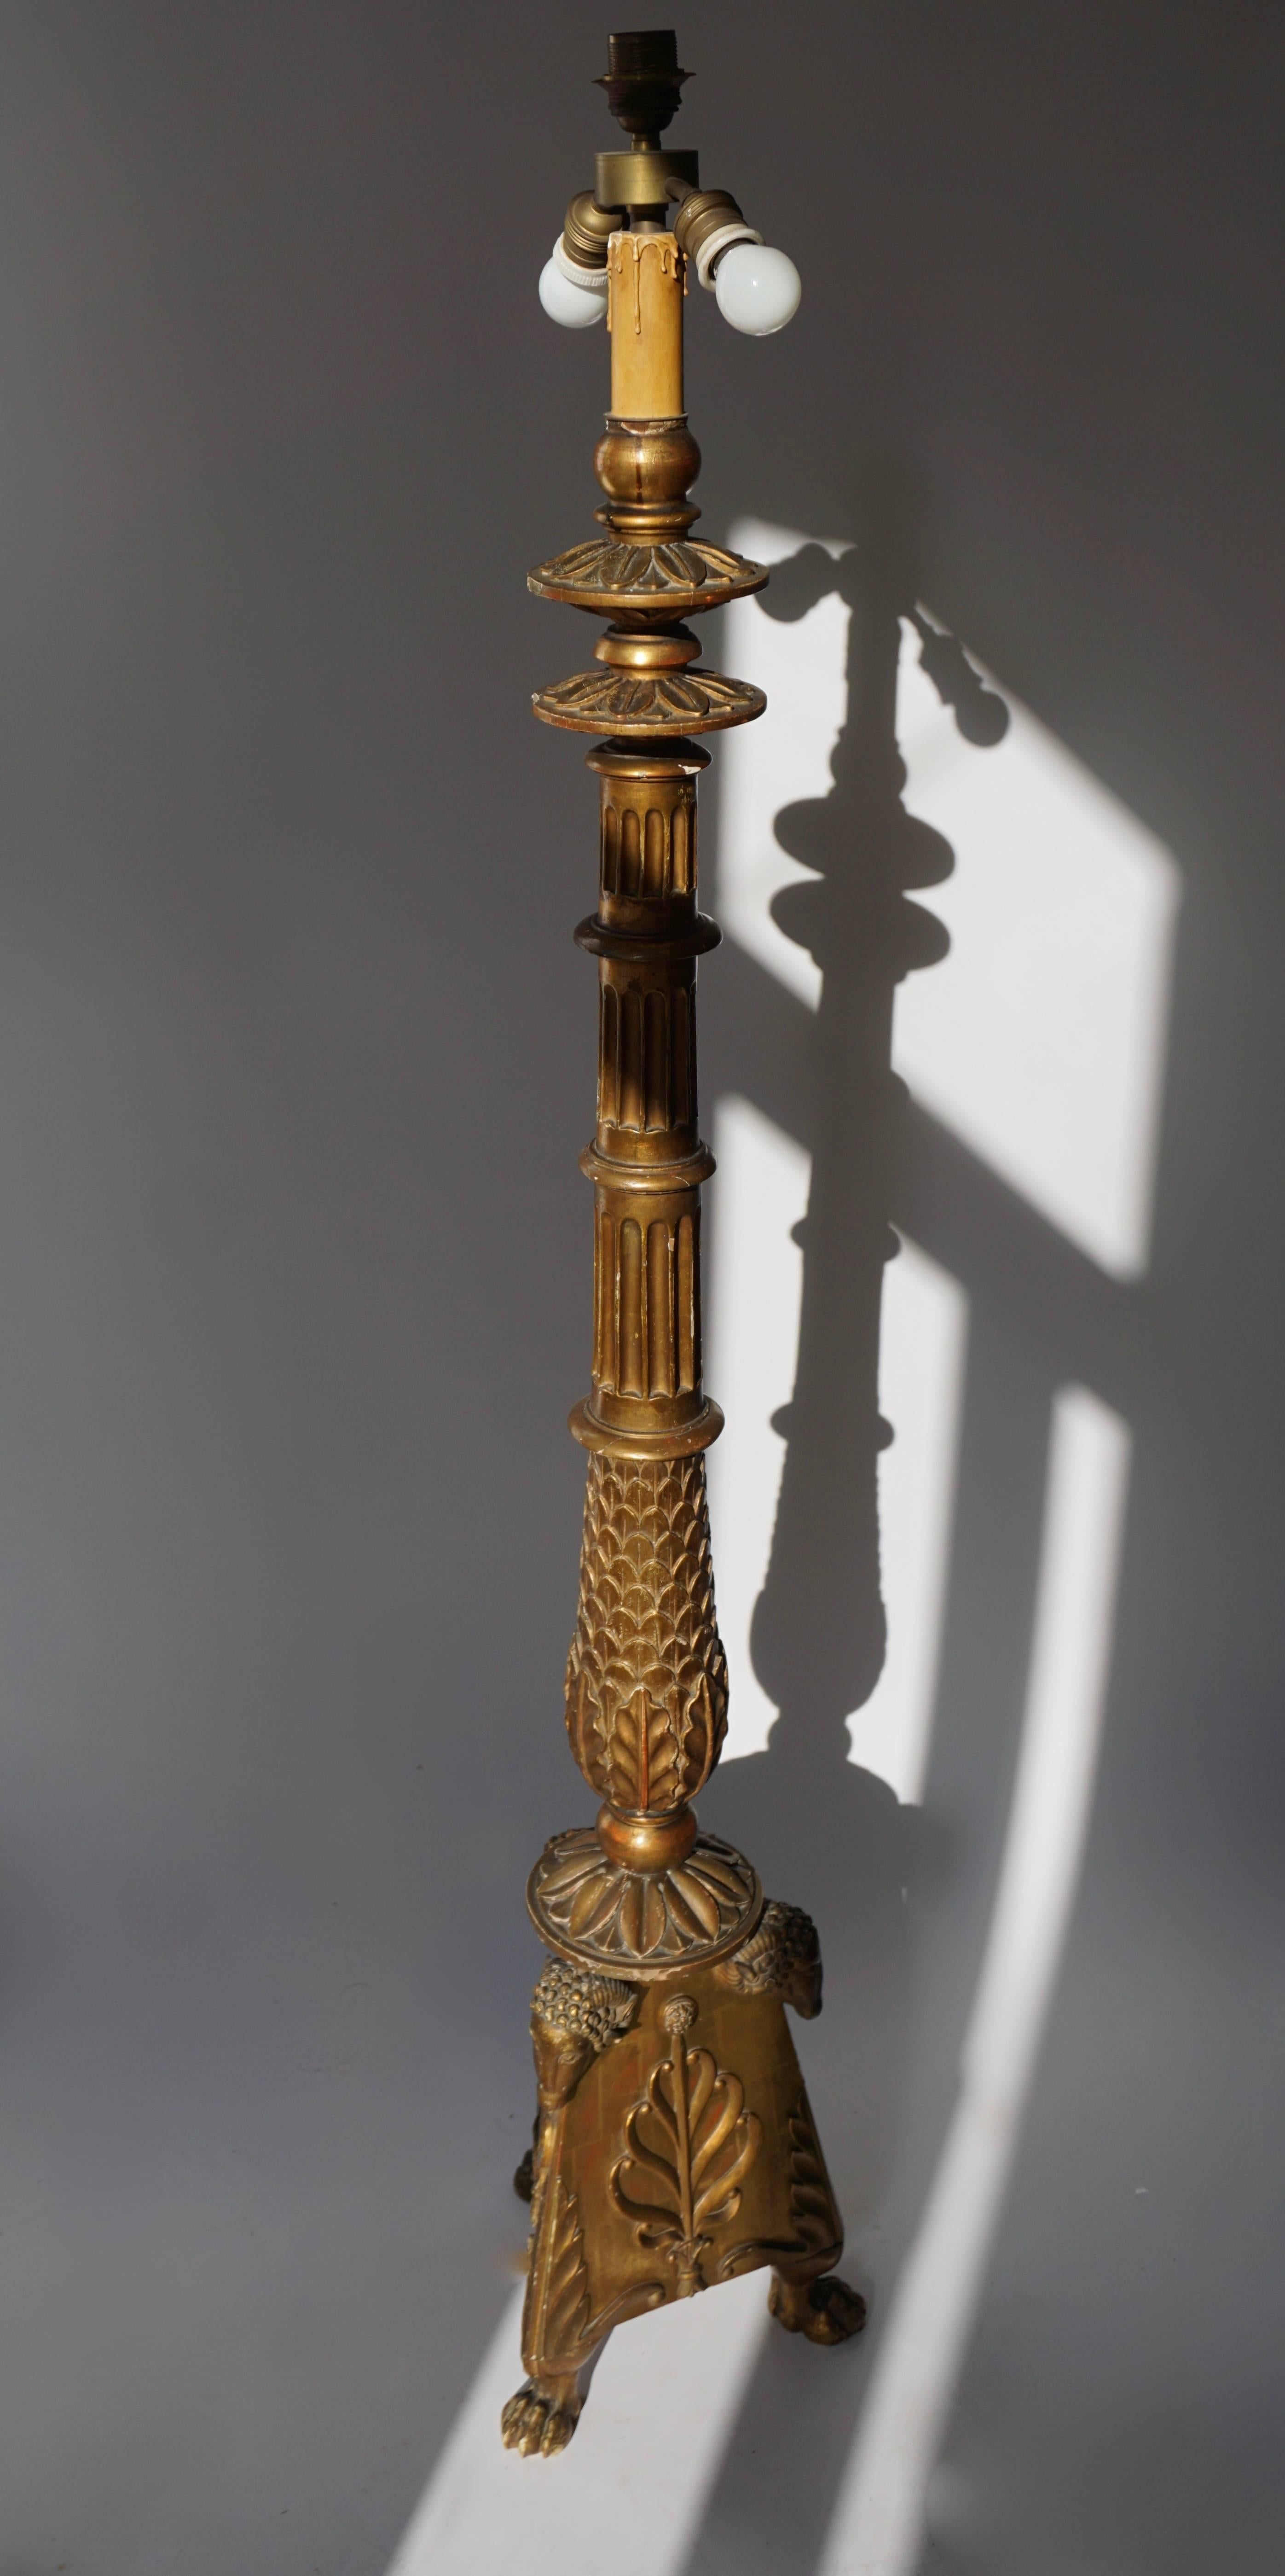 A candelabrum shaped carved giltwood lamp stand in the Greek revival neoclassical style, resting on claw feet, the base decorated with protruding ram’ s heads and palmettes, mid-20th century.

The height is without lampshade is 165 cm. Diameter is